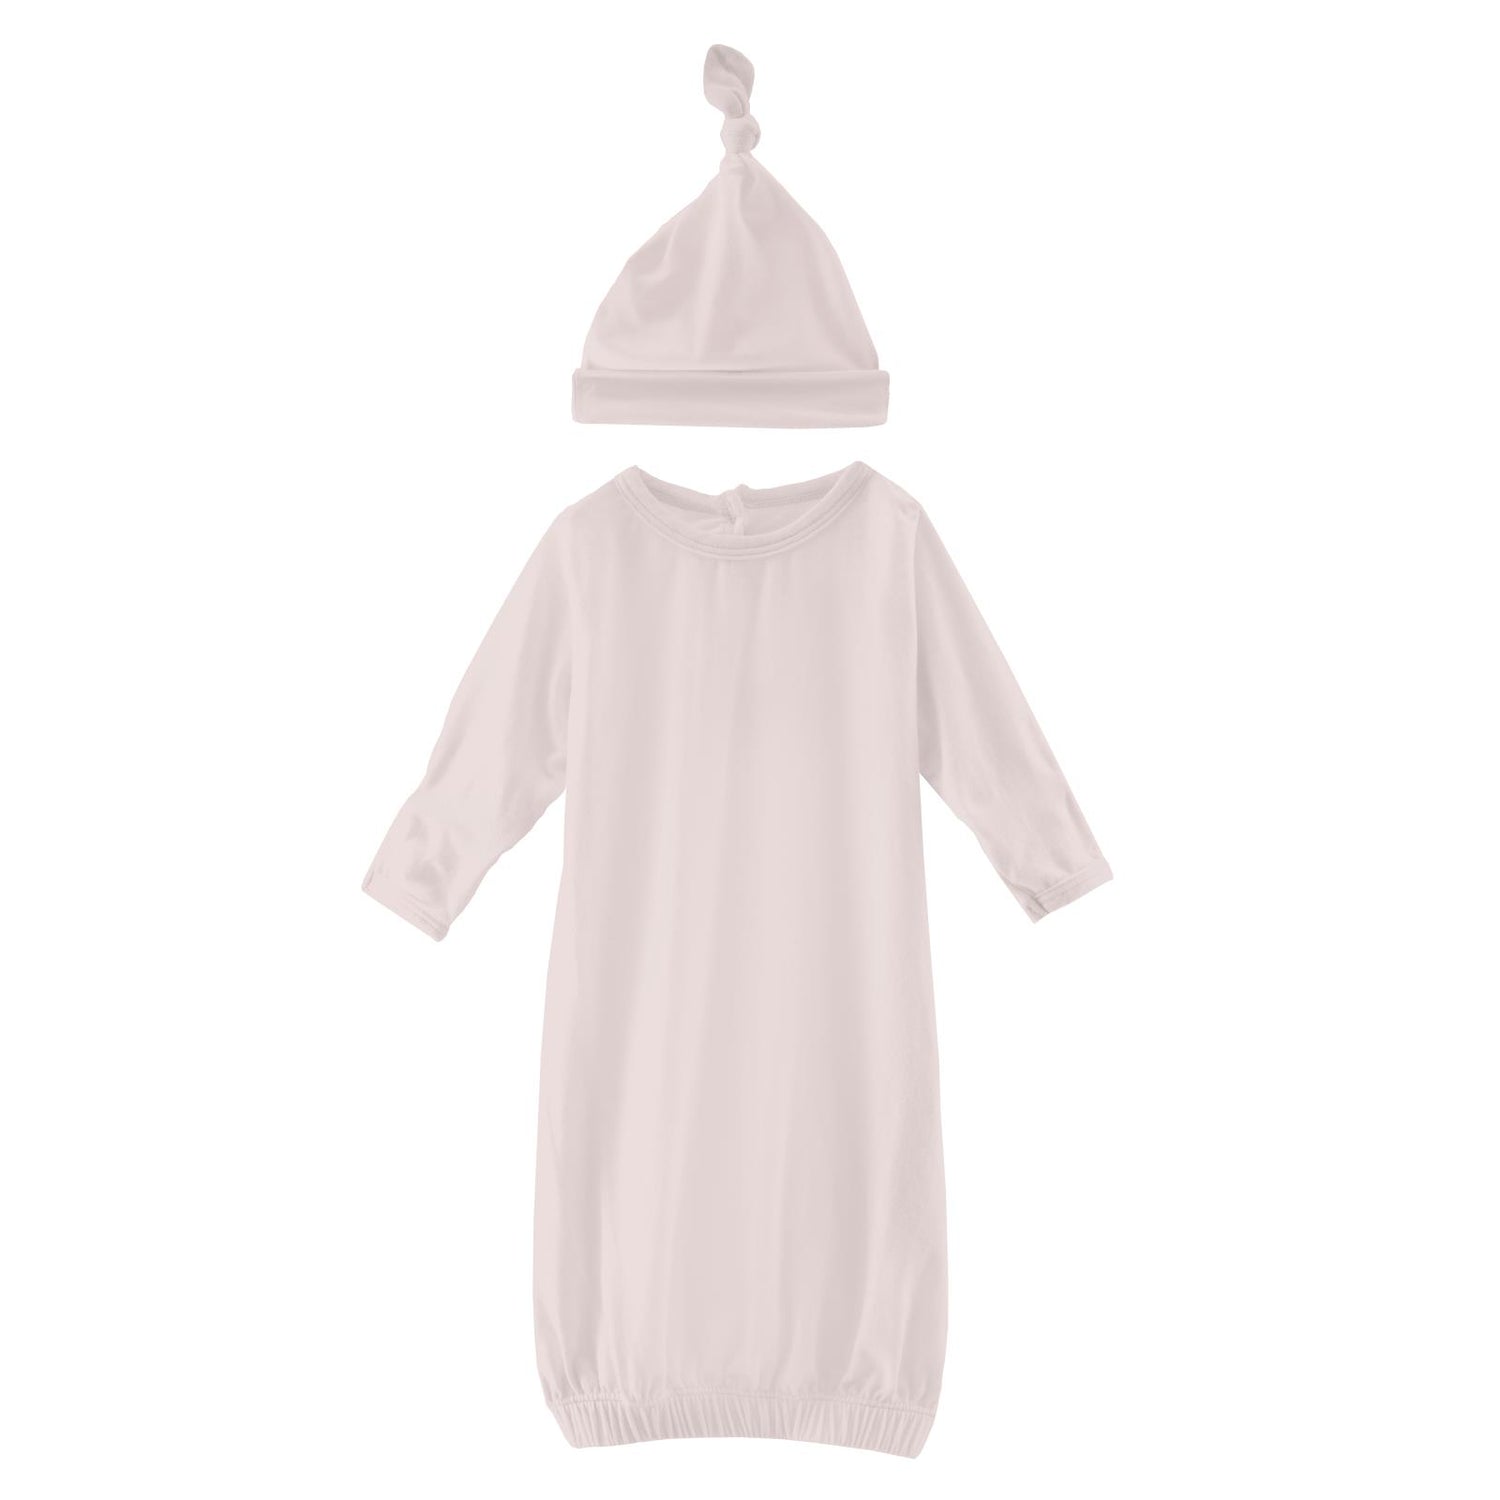 Layette Gown & Single Knot Hat Set in Macaroon